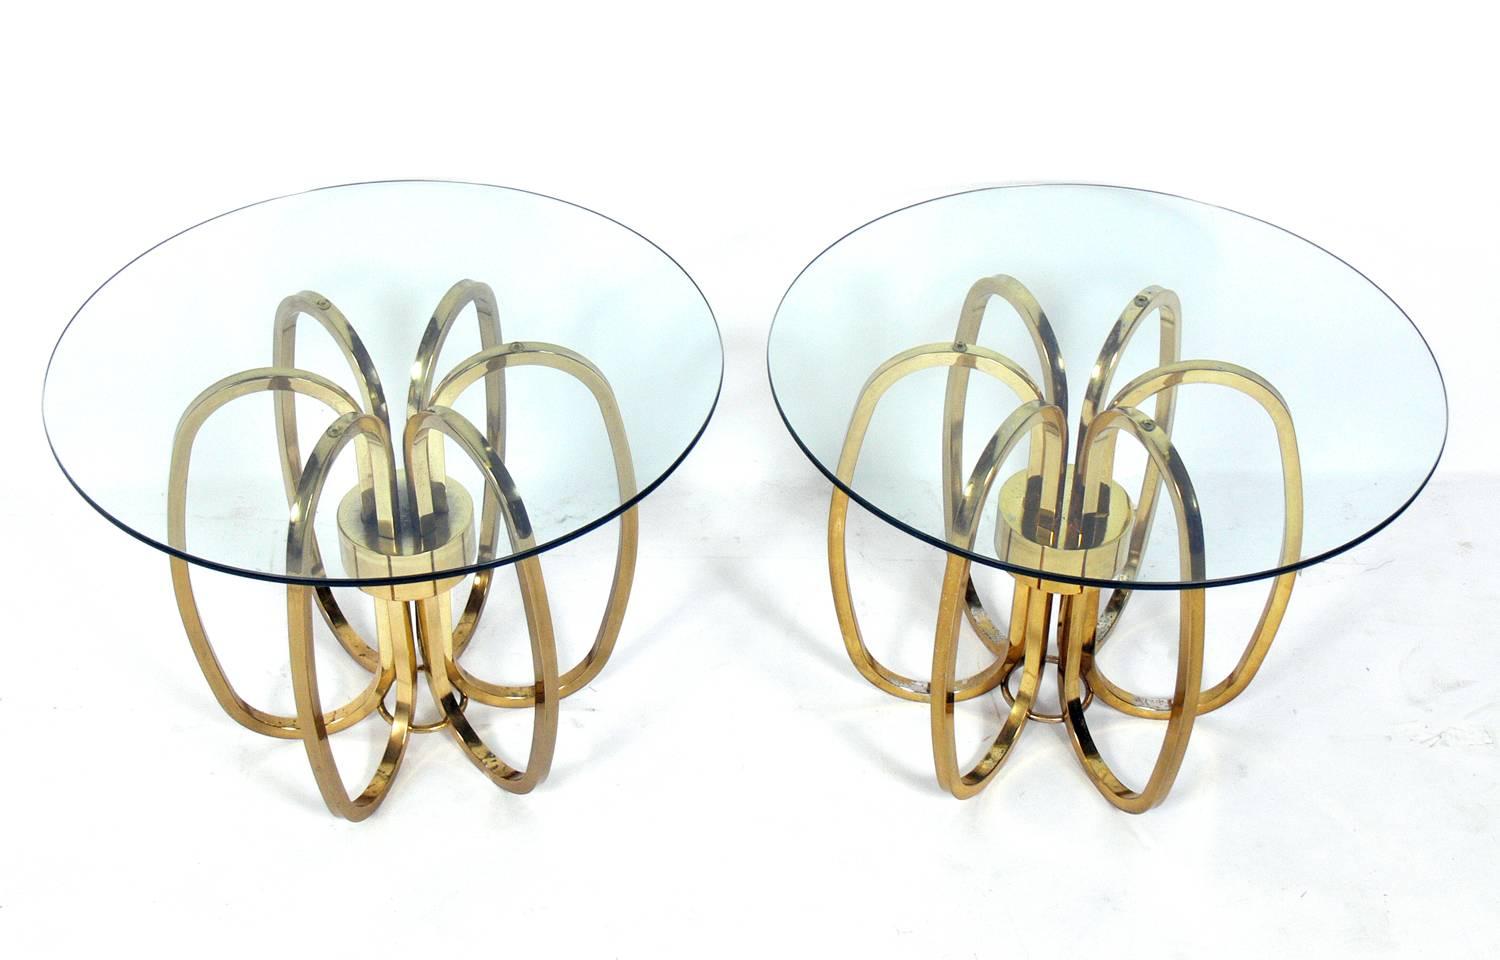 Pair of sculptural brass plated metal side tables, American, circa 1960s. They are a versatile size and can be used as end or side tables, or as nightstands.